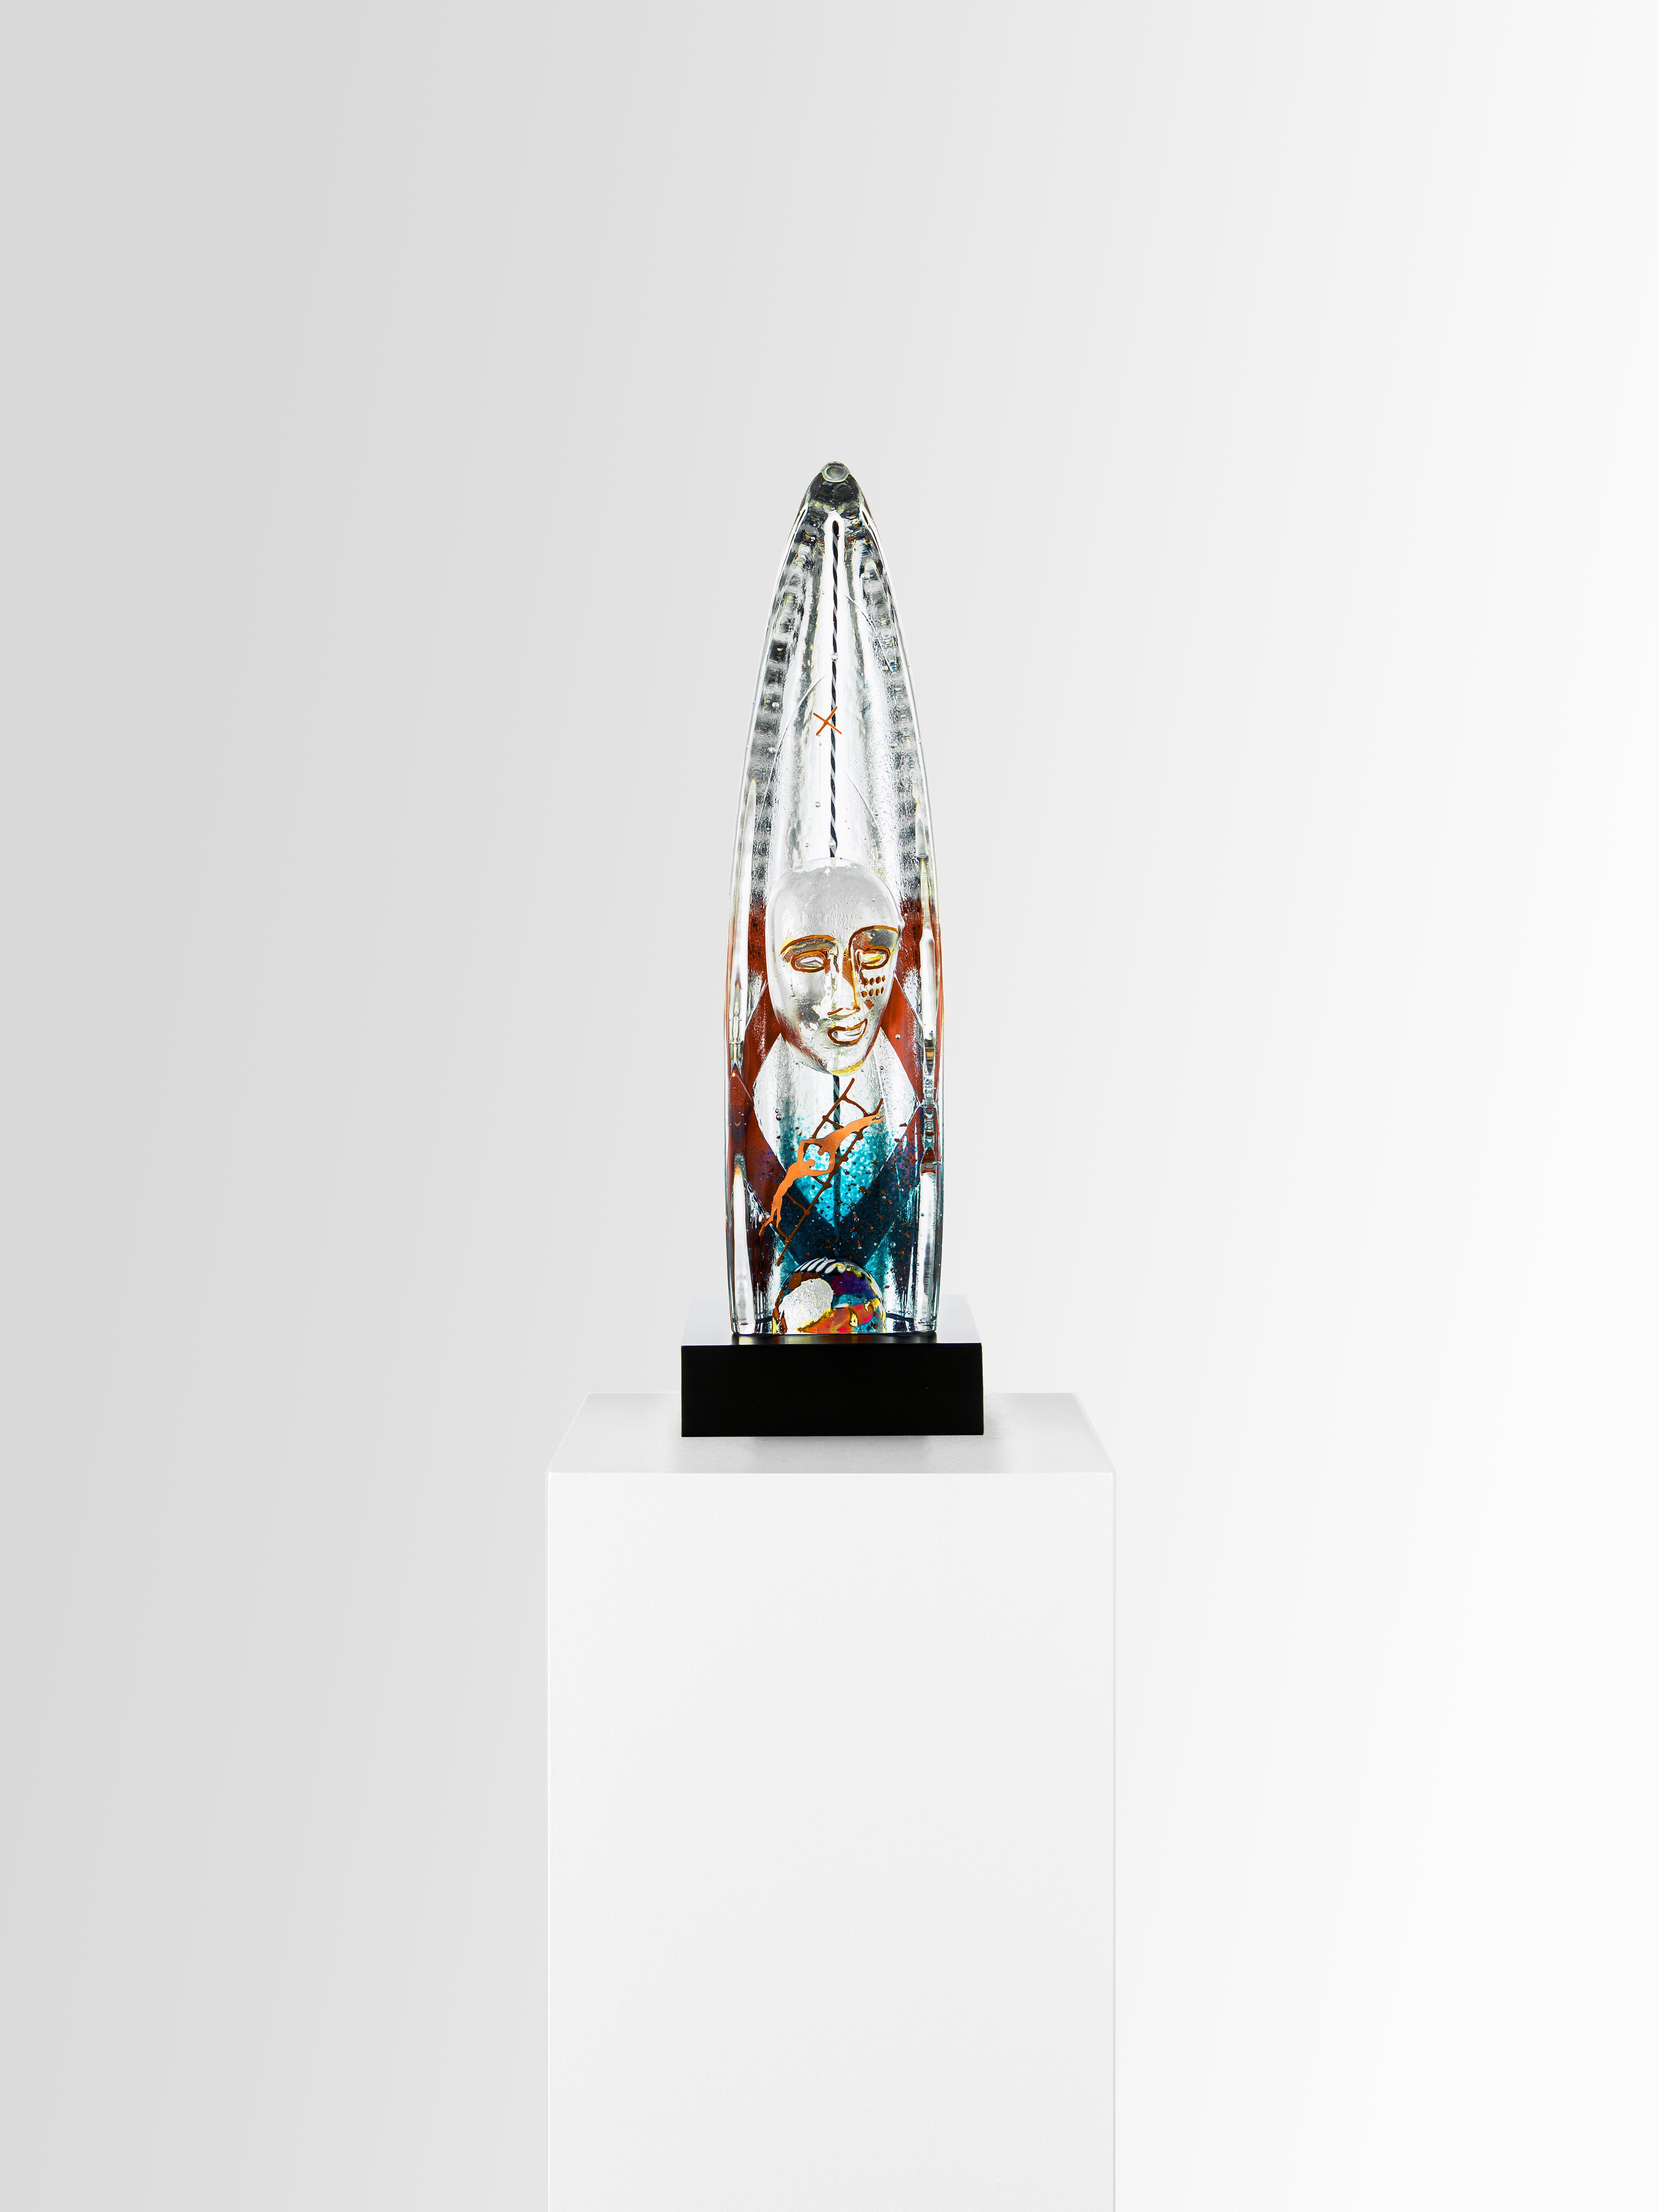 Vertical Journey is a creation by the renowned Swedish glass artist Bertil Vallien who sees the boat as a symbol of freedom and solitude. The boat has become one of his main signatures, recreated in different sizes and forms. Vertical Journey is